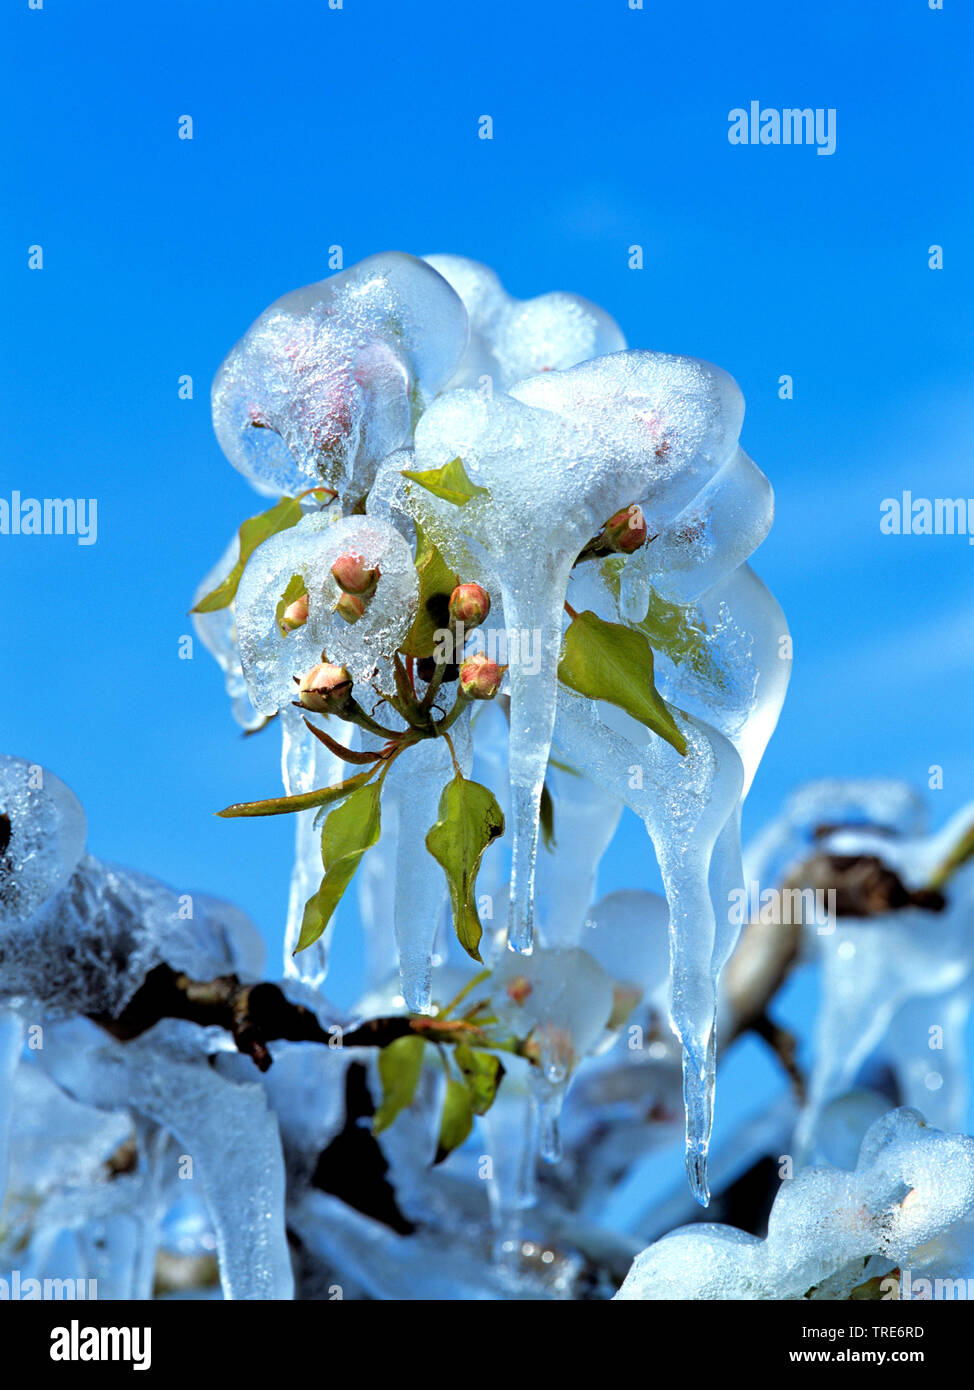 apple tree (Malus domestica), flowers with ice, Germany Stock Photo